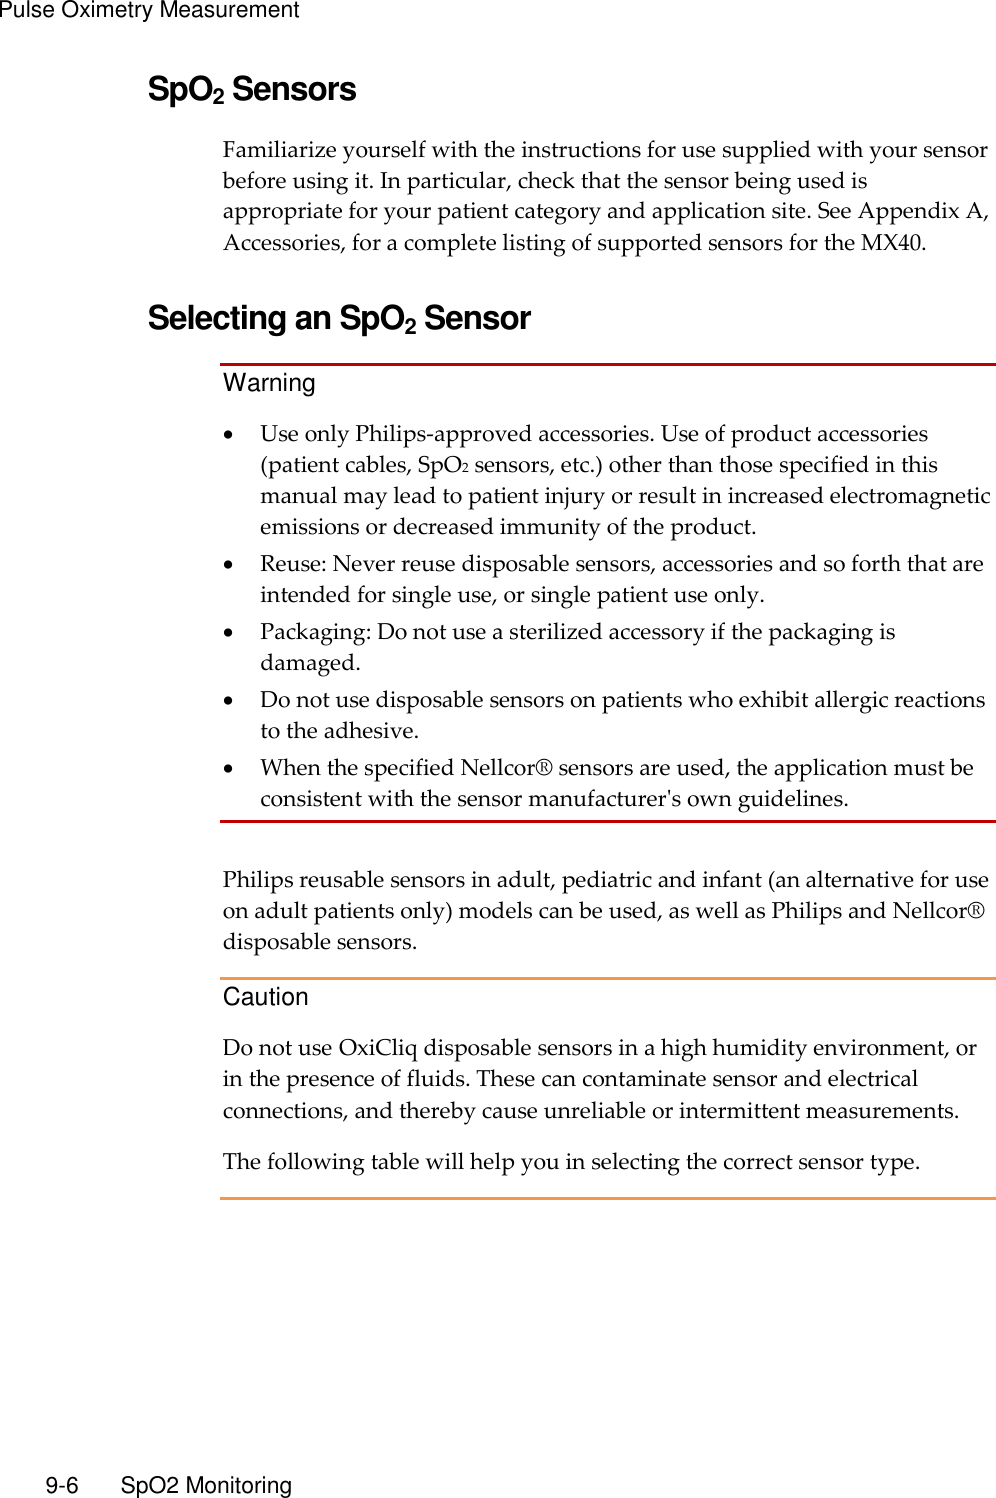 Pulse Oximetry Measurement   9-6    SpO2 Monitoring SpO2 Sensors Familiarize yourself with the instructions for use supplied with your sensor before using it. In particular, check that the sensor being used is appropriate for your patient category and application site. See Appendix A, Accessories, for a complete listing of supported sensors for the MX40.  Selecting an SpO2 Sensor Warning  Use only Philips-approved accessories. Use of product accessories (patient cables, SpO2 sensors, etc.) other than those specified in this manual may lead to patient injury or result in increased electromagnetic emissions or decreased immunity of the product.  Reuse: Never reuse disposable sensors, accessories and so forth that are intended for single use, or single patient use only.  Packaging: Do not use a sterilized accessory if the packaging is damaged.  Do not use disposable sensors on patients who exhibit allergic reactions to the adhesive.  When the specified Nellcor® sensors are used, the application must be consistent with the sensor manufacturer&apos;s own guidelines.  Philips reusable sensors in adult, pediatric and infant (an alternative for use on adult patients only) models can be used, as well as Philips and Nellcor® disposable sensors. Caution Do not use OxiCliq disposable sensors in a high humidity environment, or in the presence of fluids. These can contaminate sensor and electrical connections, and thereby cause unreliable or intermittent measurements. The following table will help you in selecting the correct sensor type.  